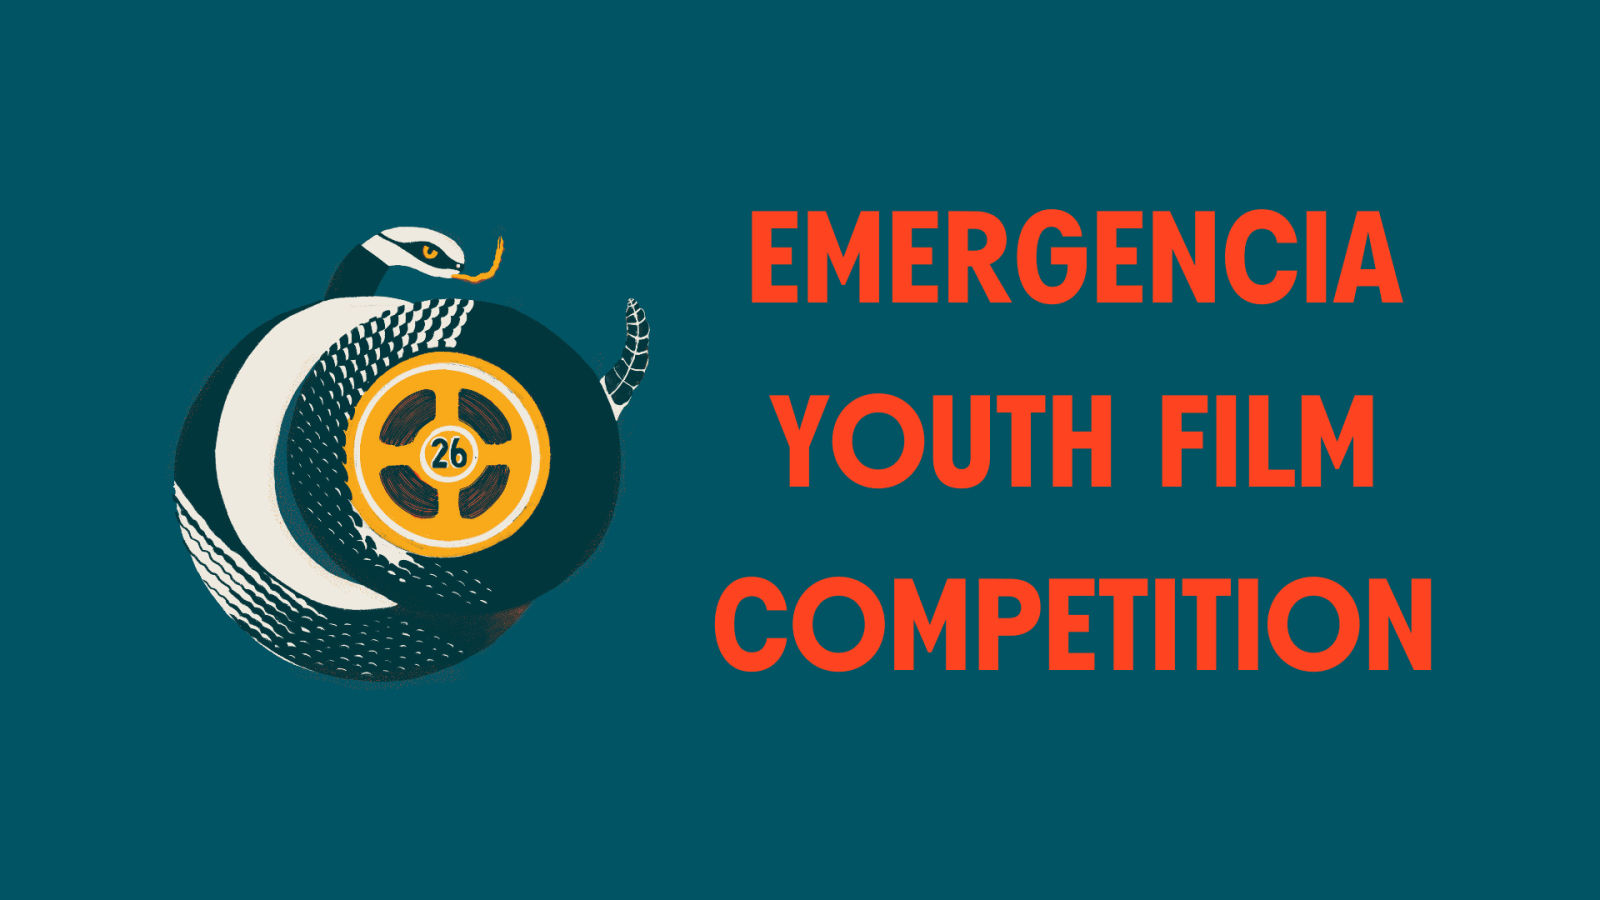 Emergencia Youth Film Competition